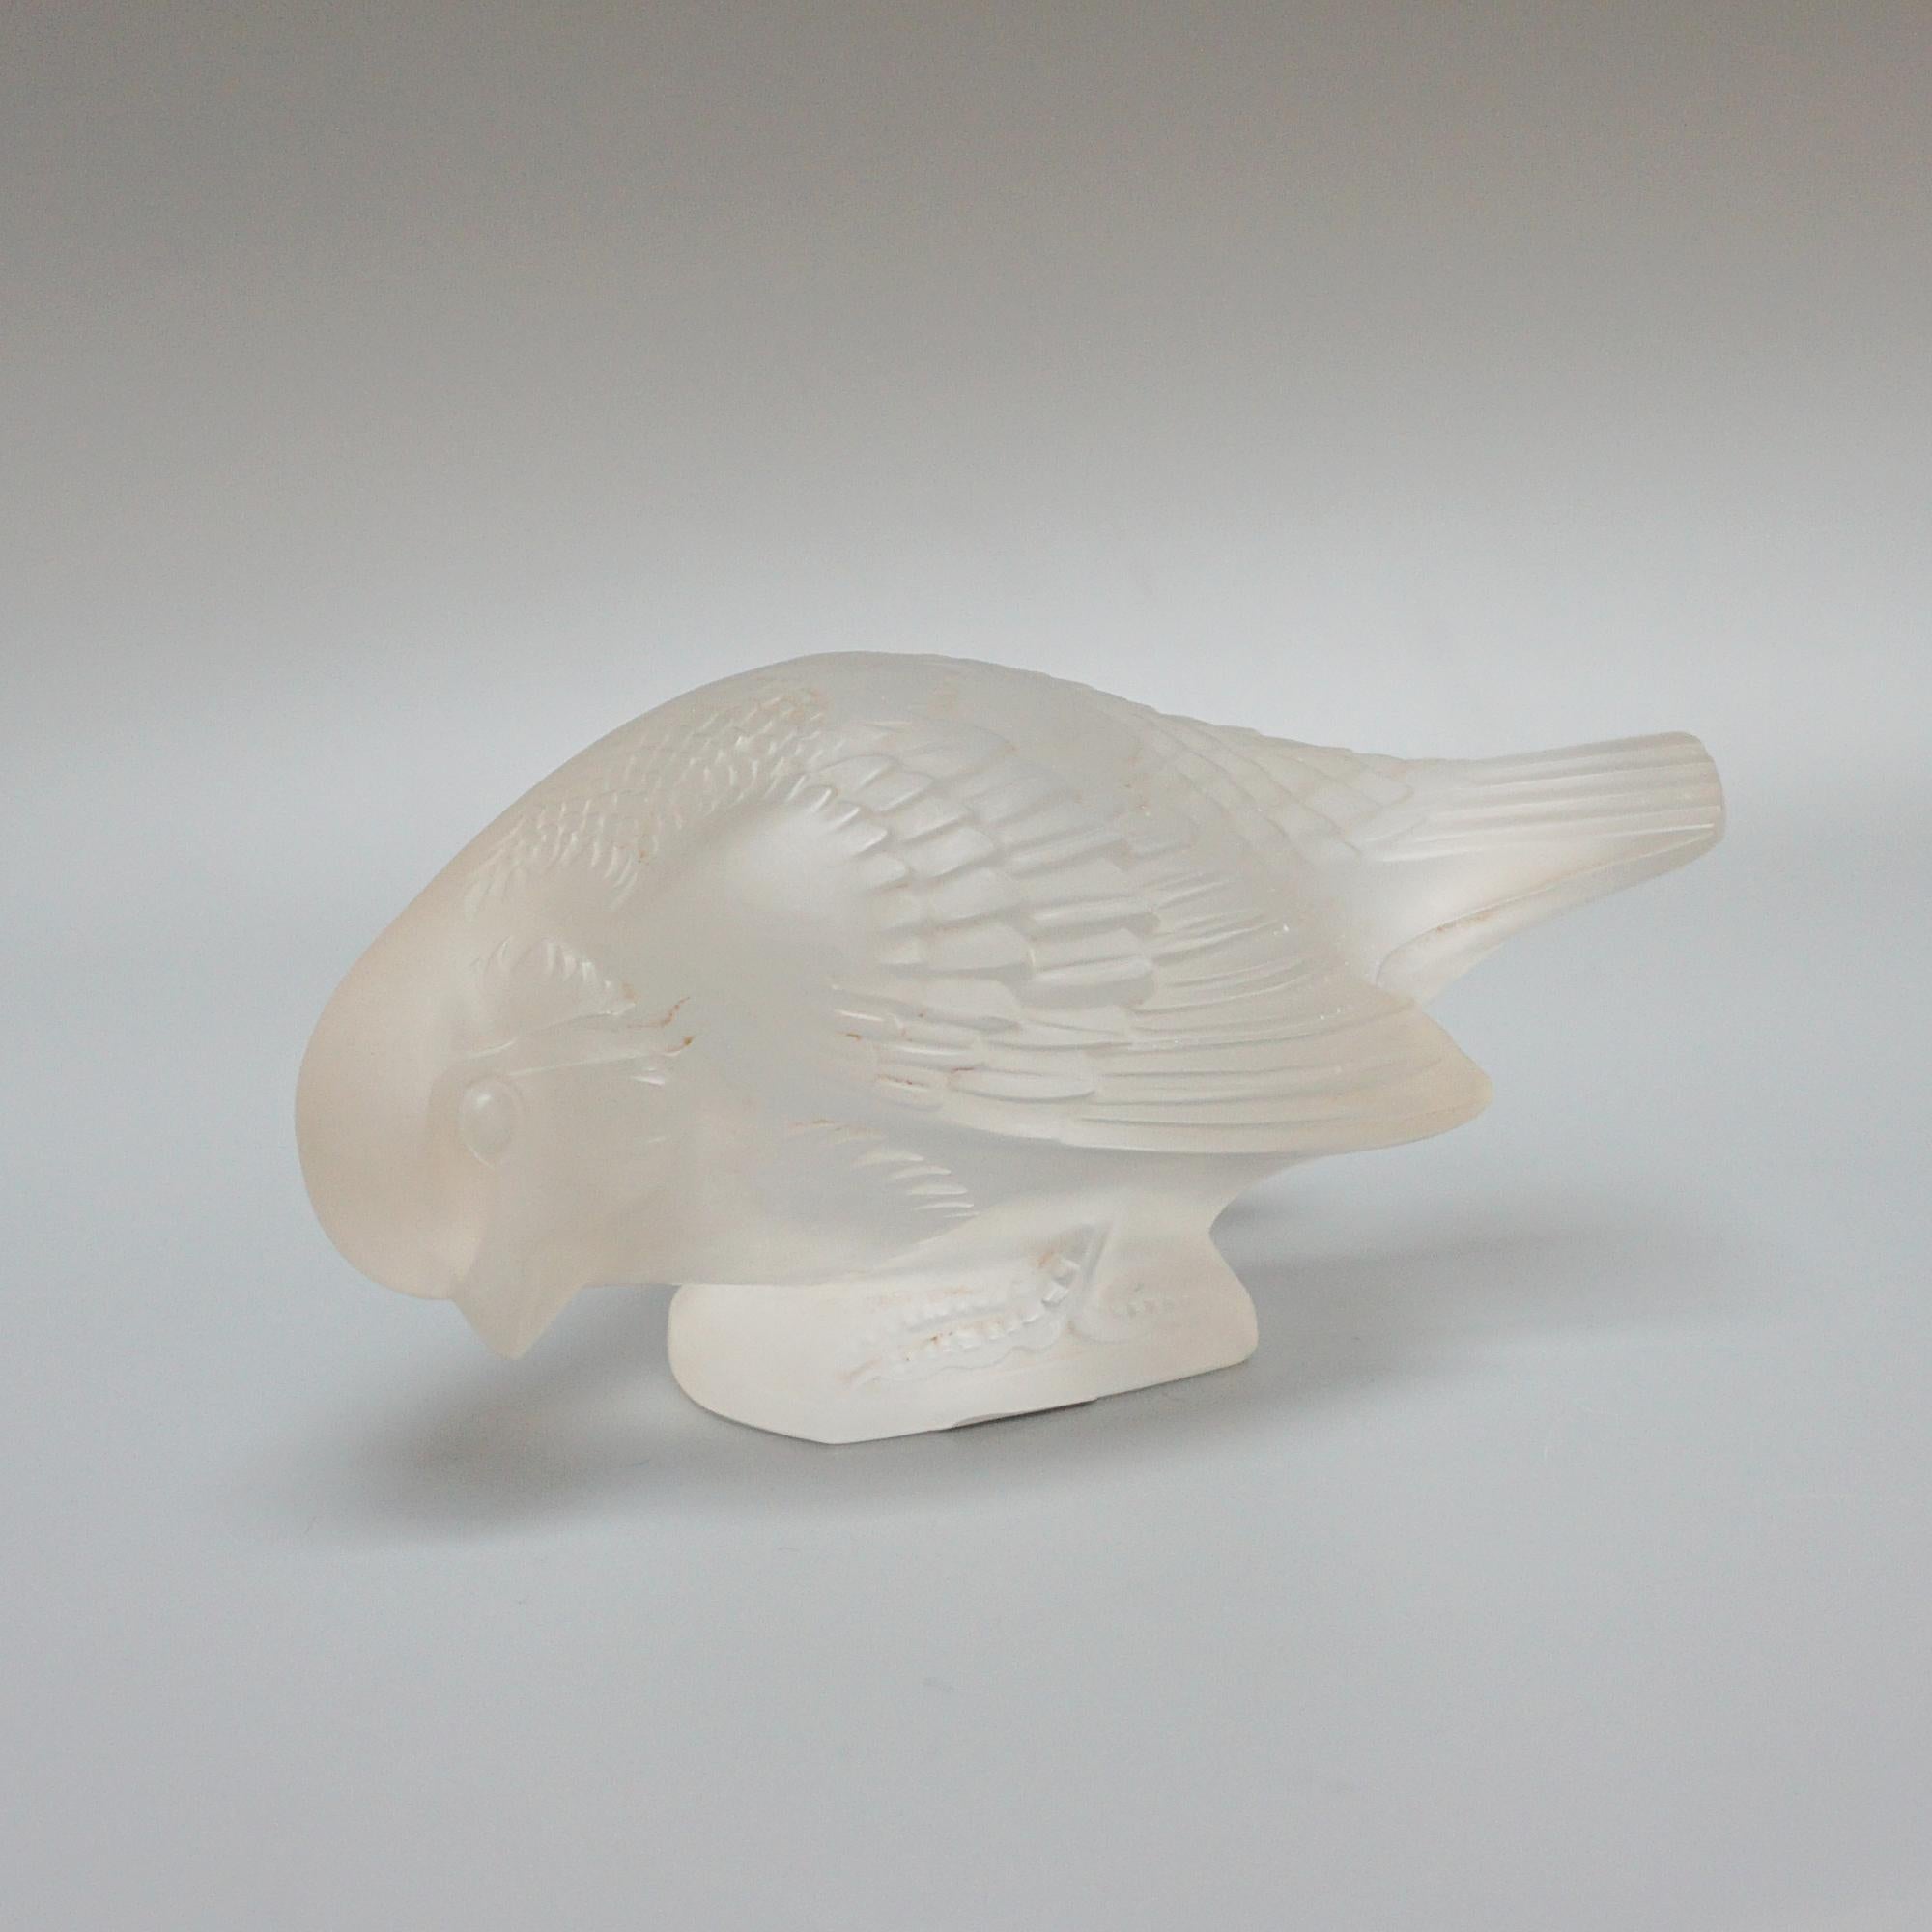 Mid-20th Century 'Moineau Sournois' Original Art Deco Glass Paperweight by Rene Lalique For Sale